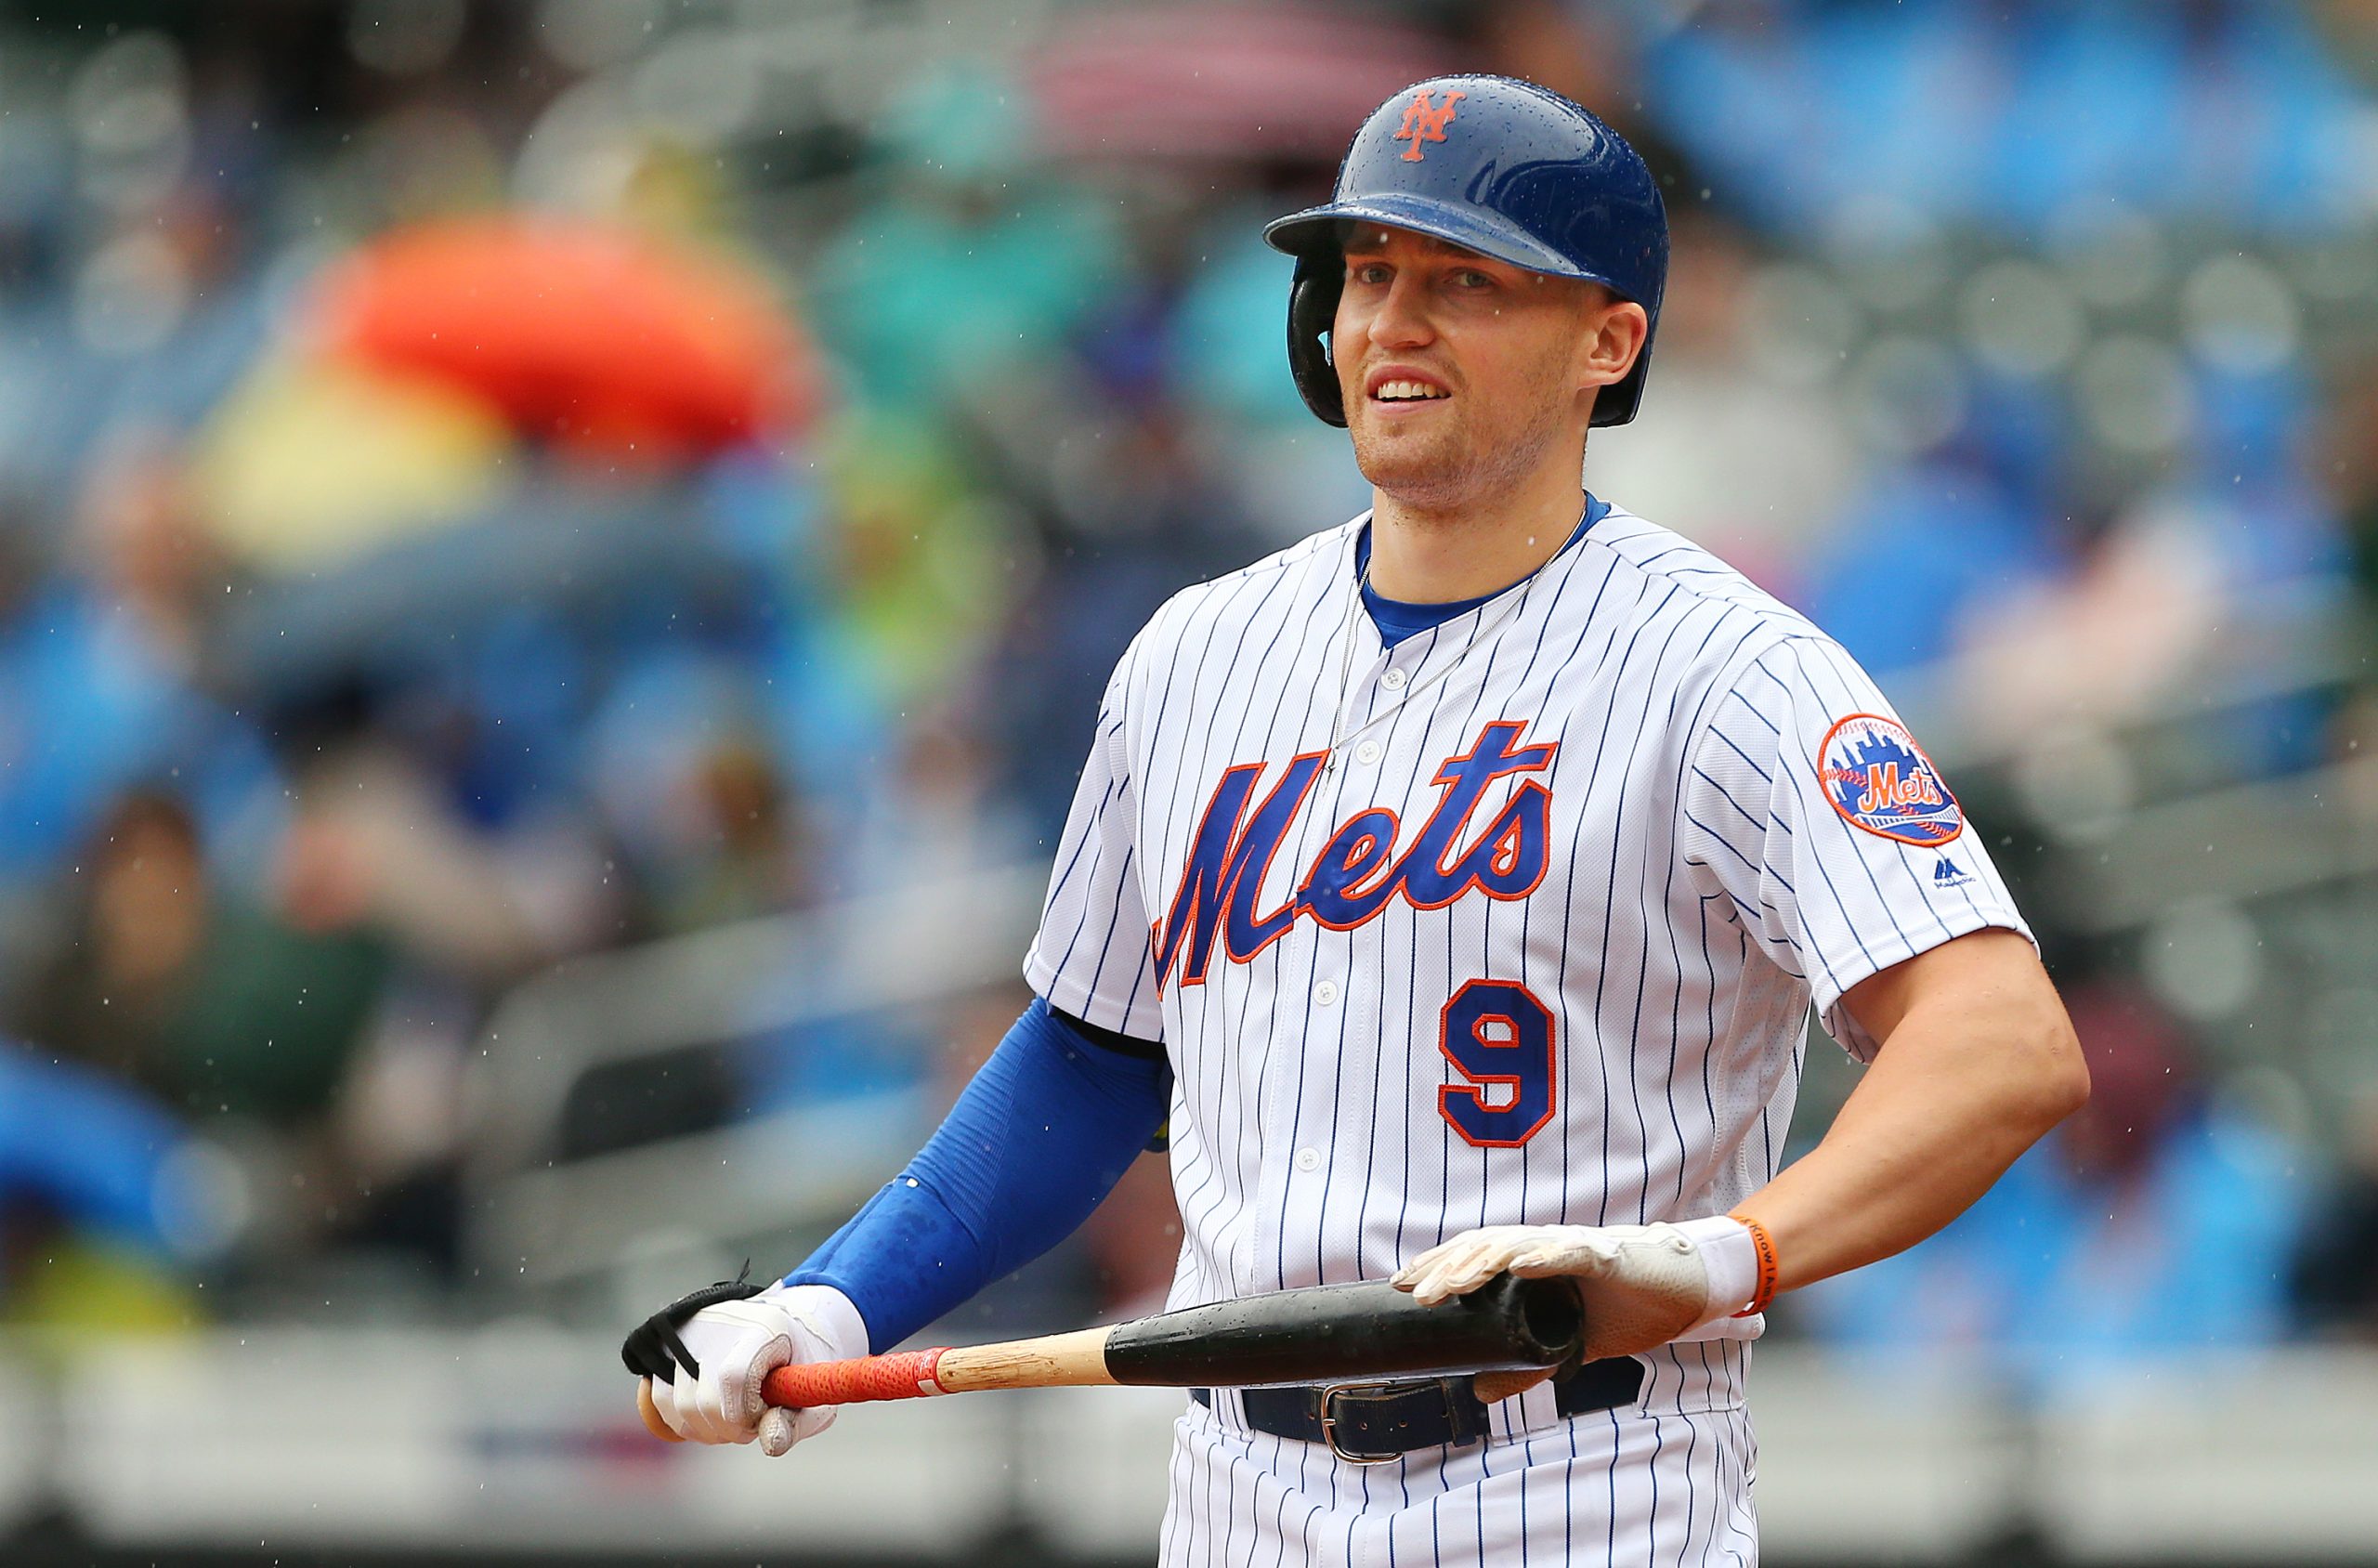 Brandon Nimmo has provided major spark at top of Mets' lineup